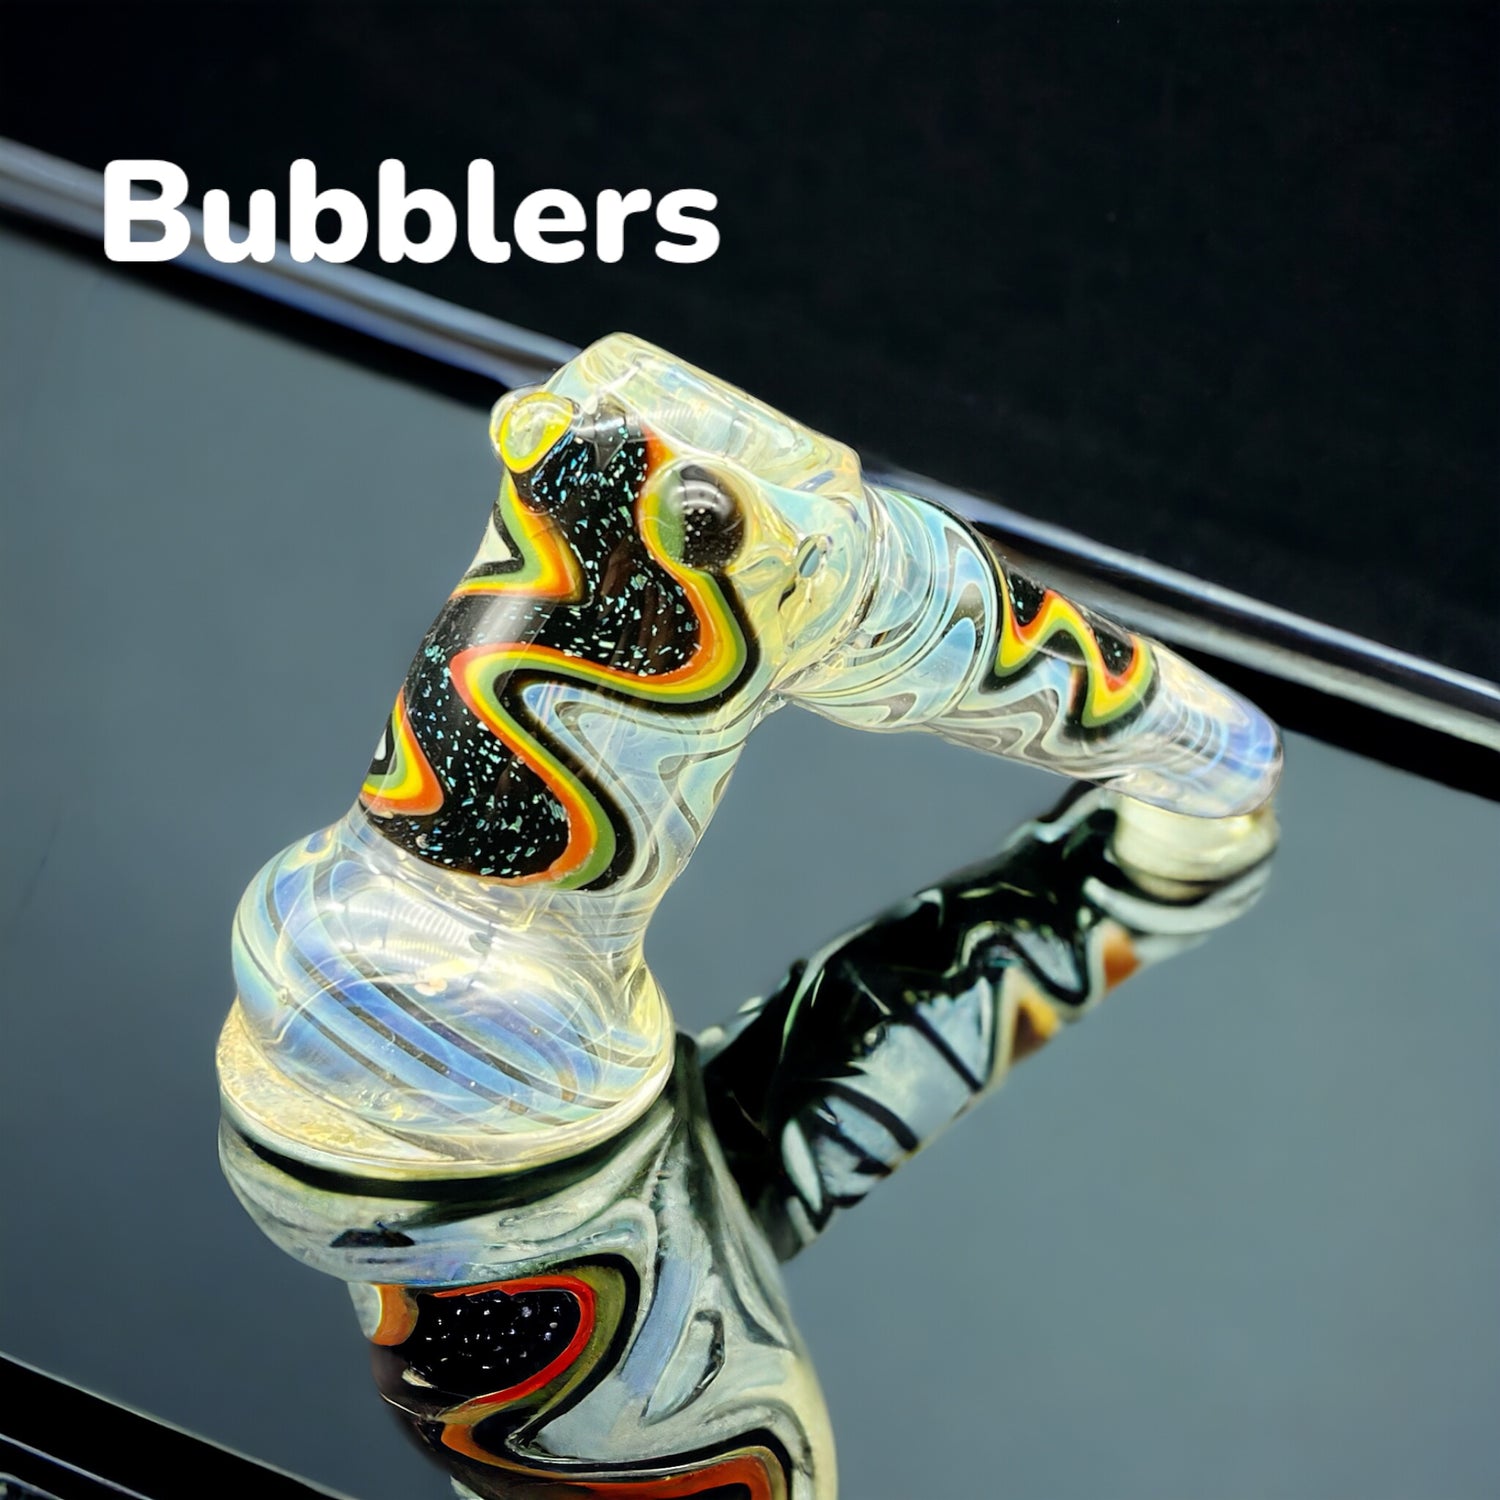 Hand bubblers 